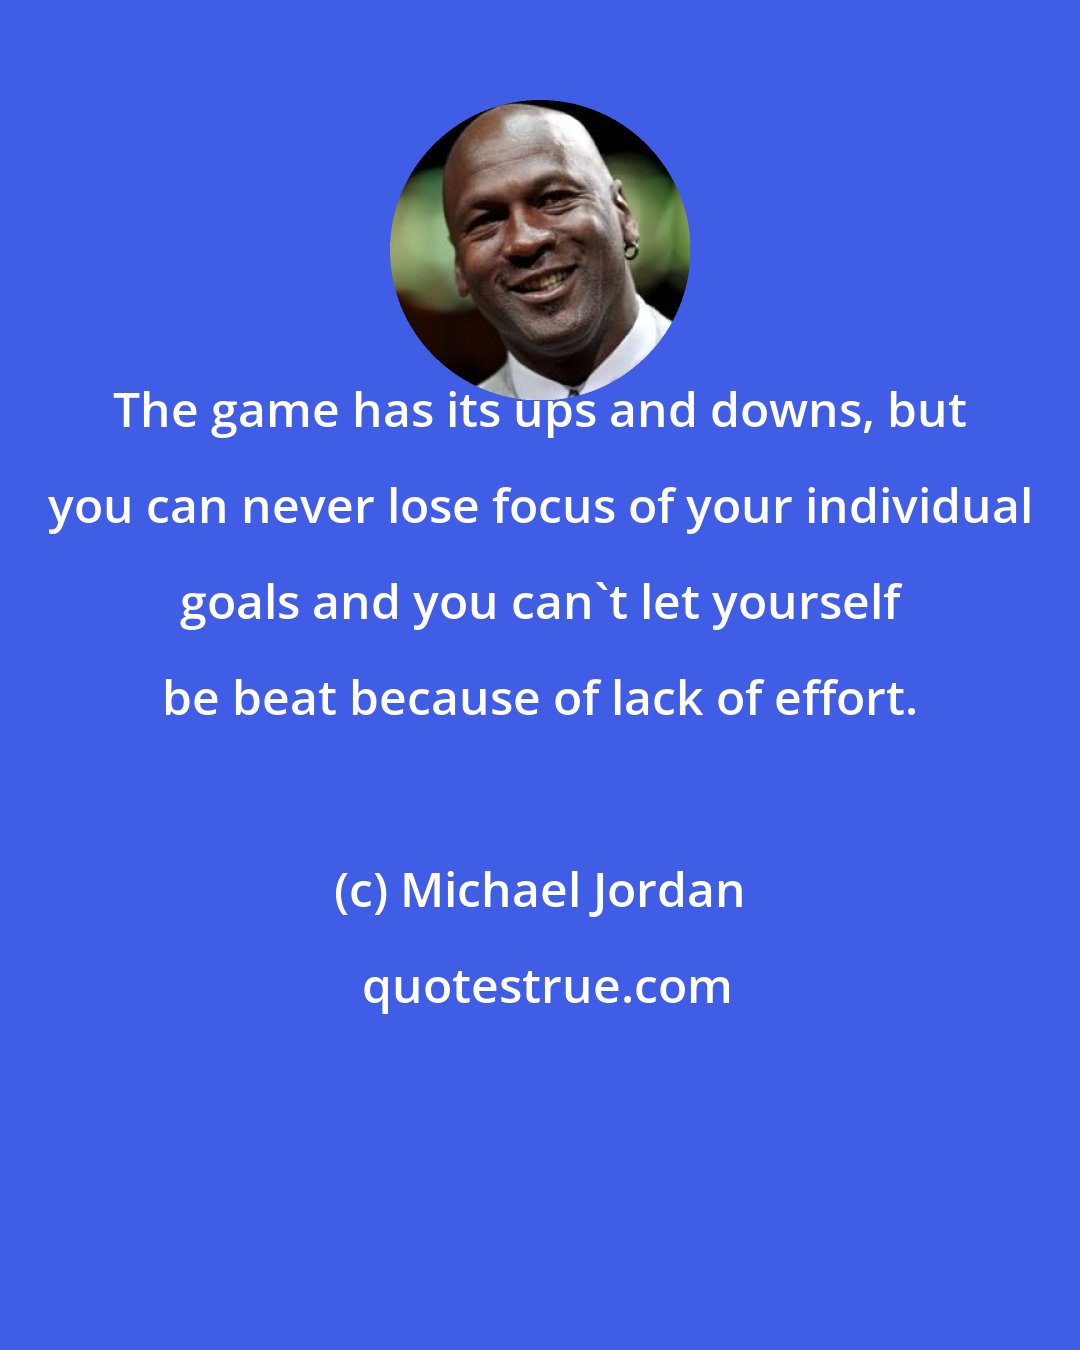 Michael Jordan: The game has its ups and downs, but you can never lose focus of your individual goals and you can't let yourself be beat because of lack of effort.